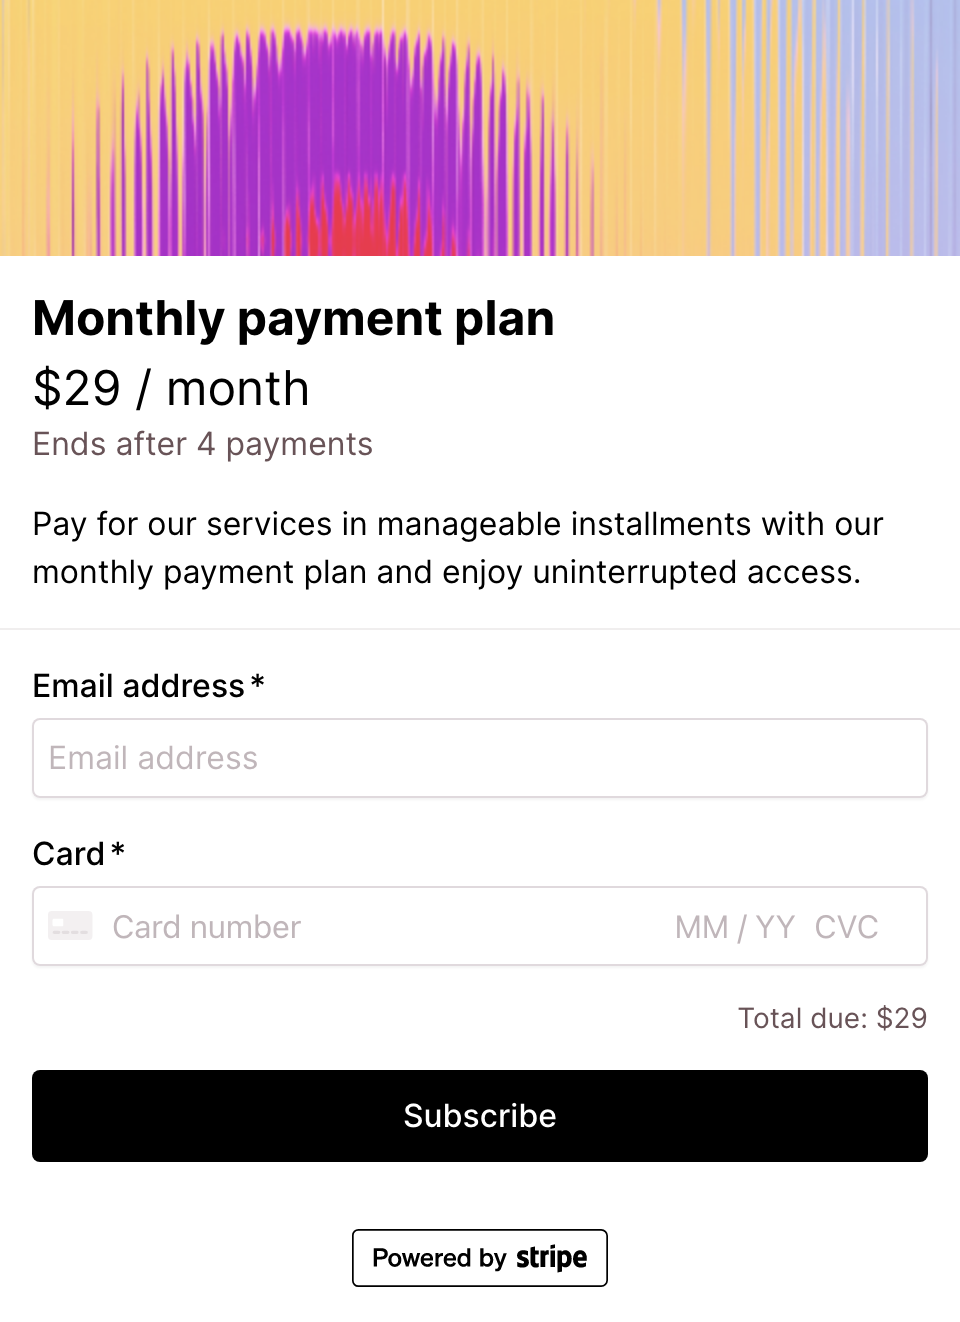 Monthly payment plan checkout form